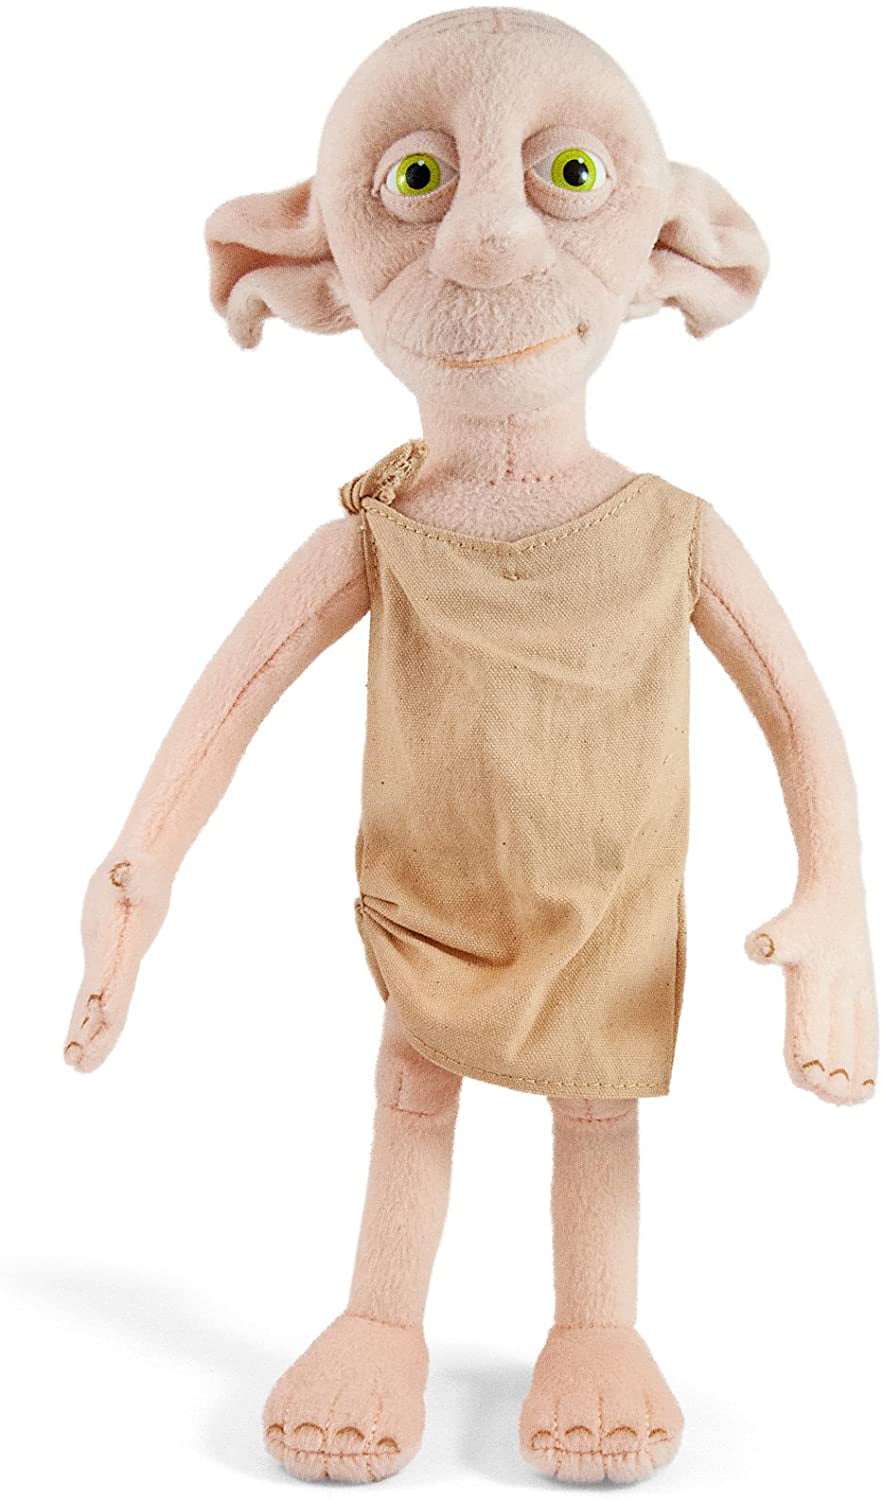 HARRY POTTER DOBBY INTERACTIVE PLUSH BY NOBLE COLLECTION NEW & BOXED NN7205 